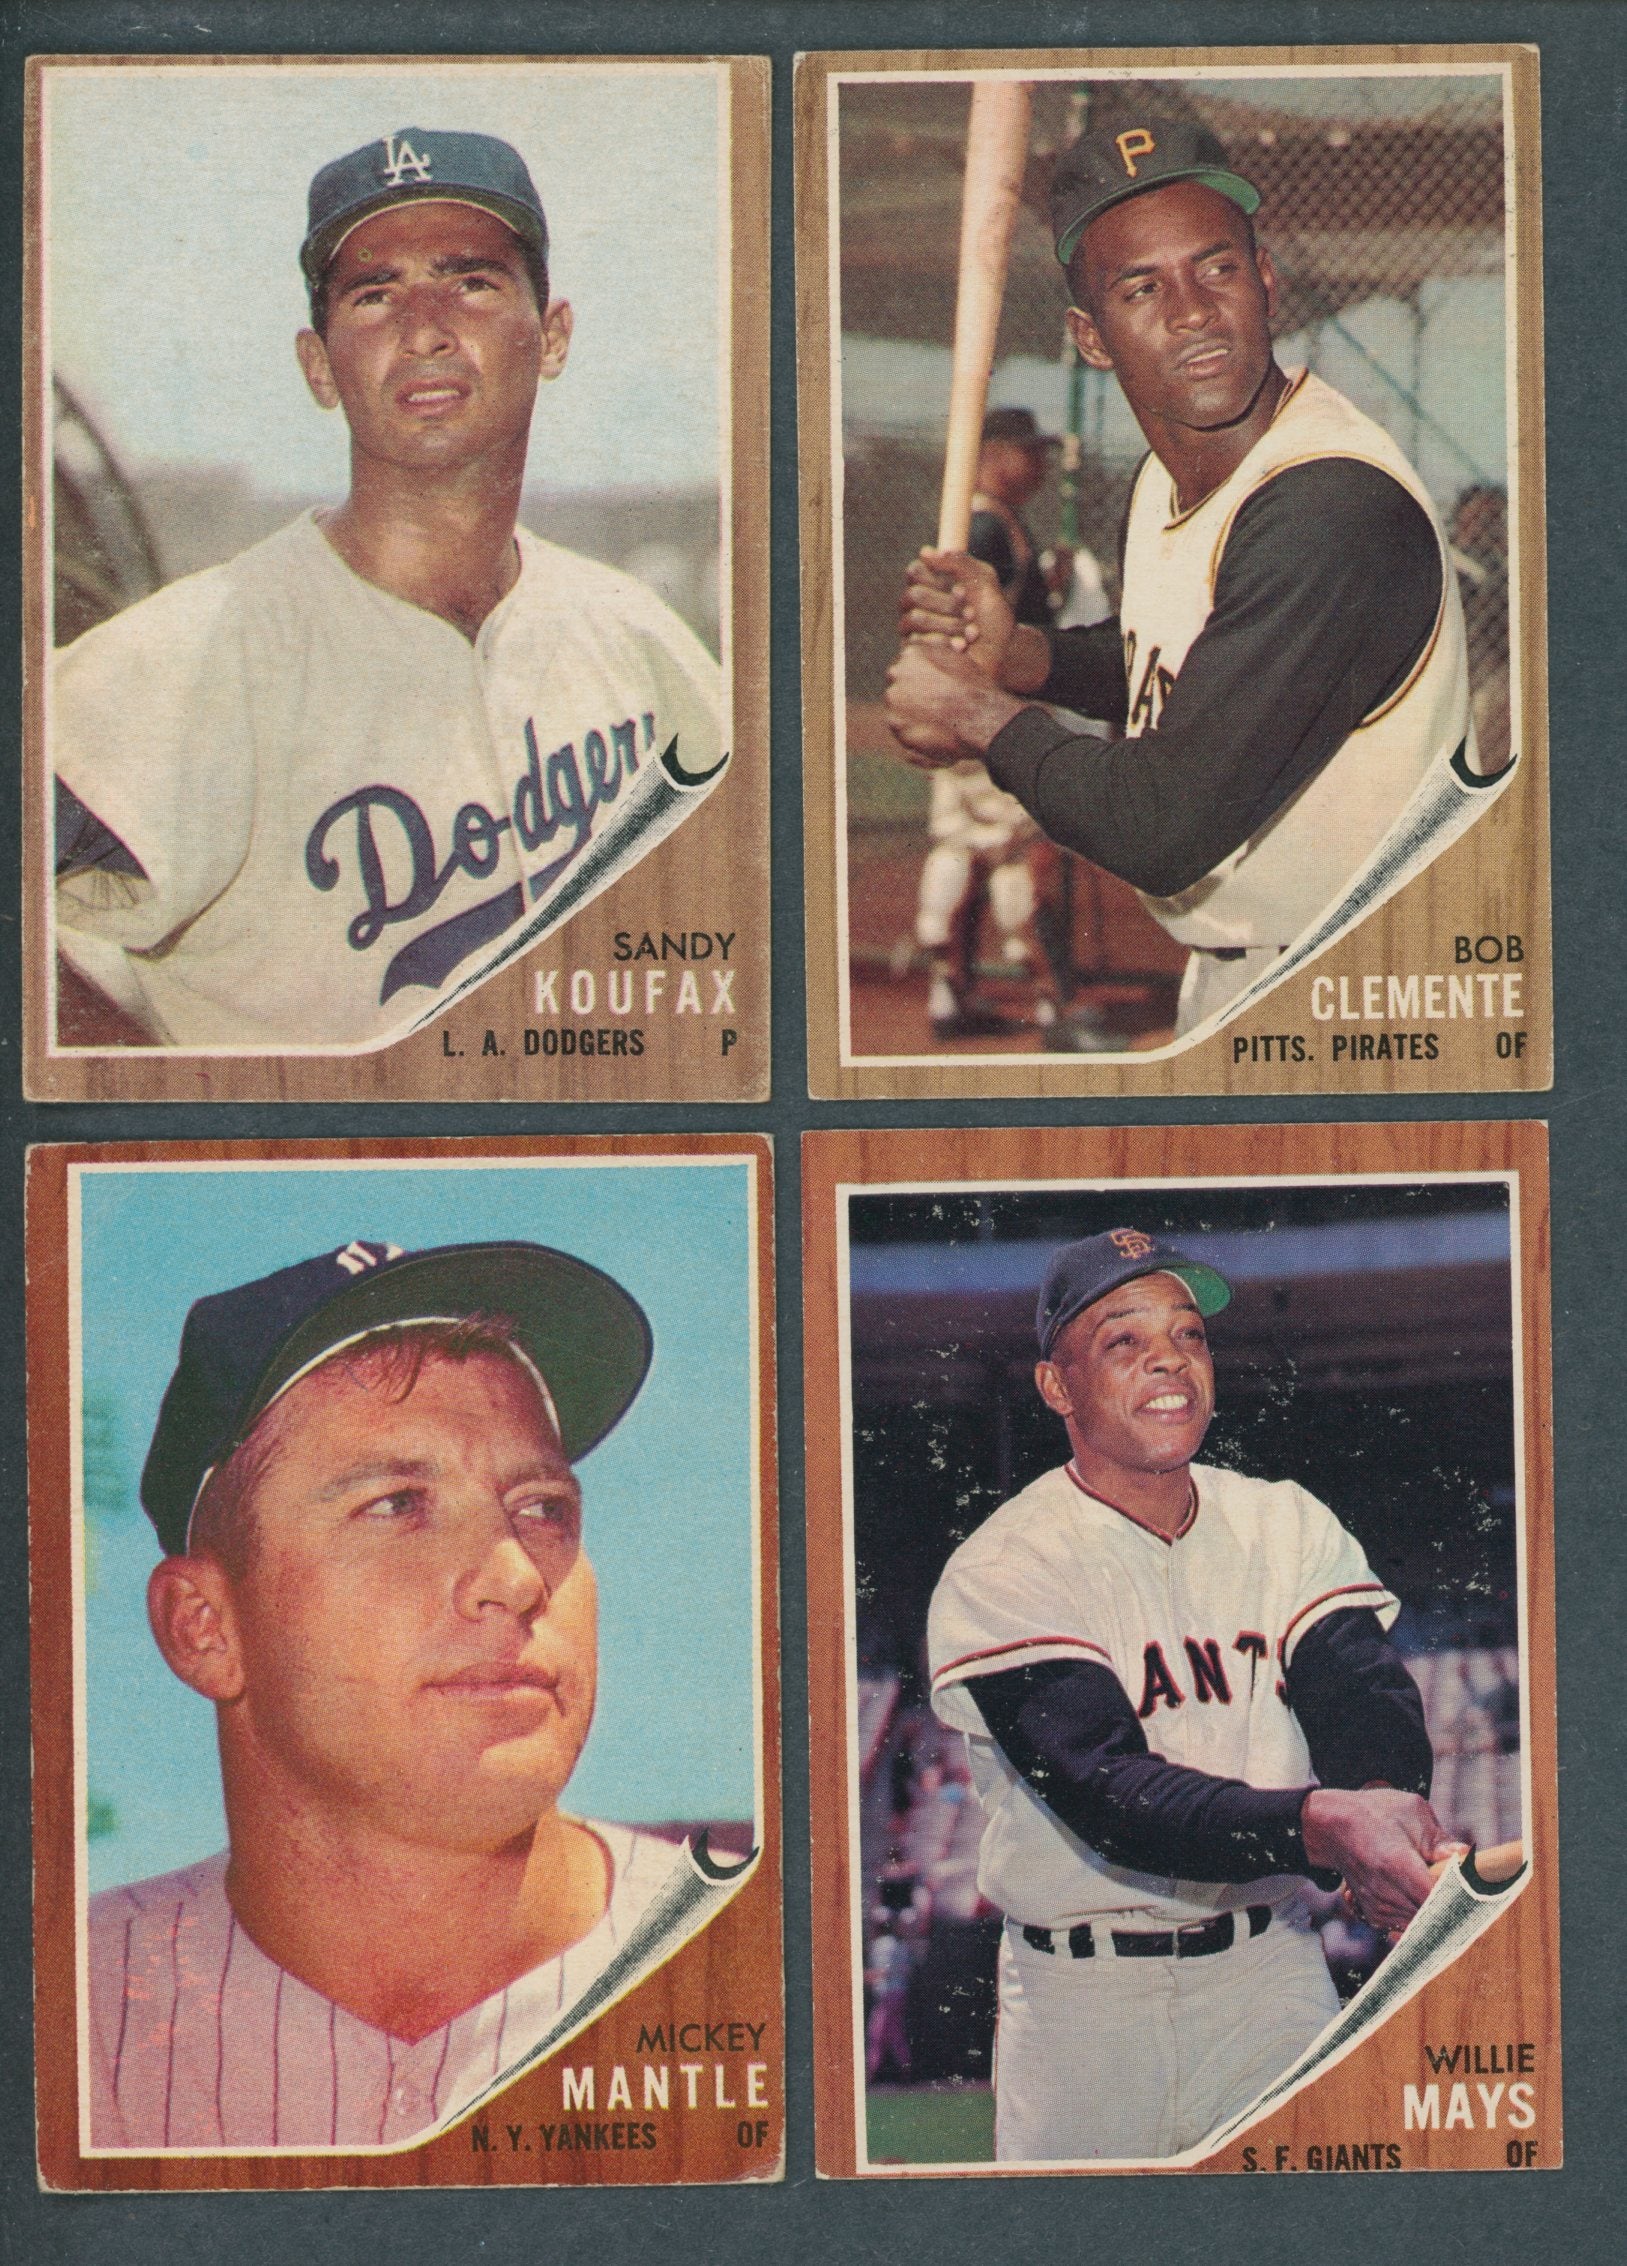 15 Most Valuable 1961 Topps Baseball Cards Old Sports Cards, 52% OFF